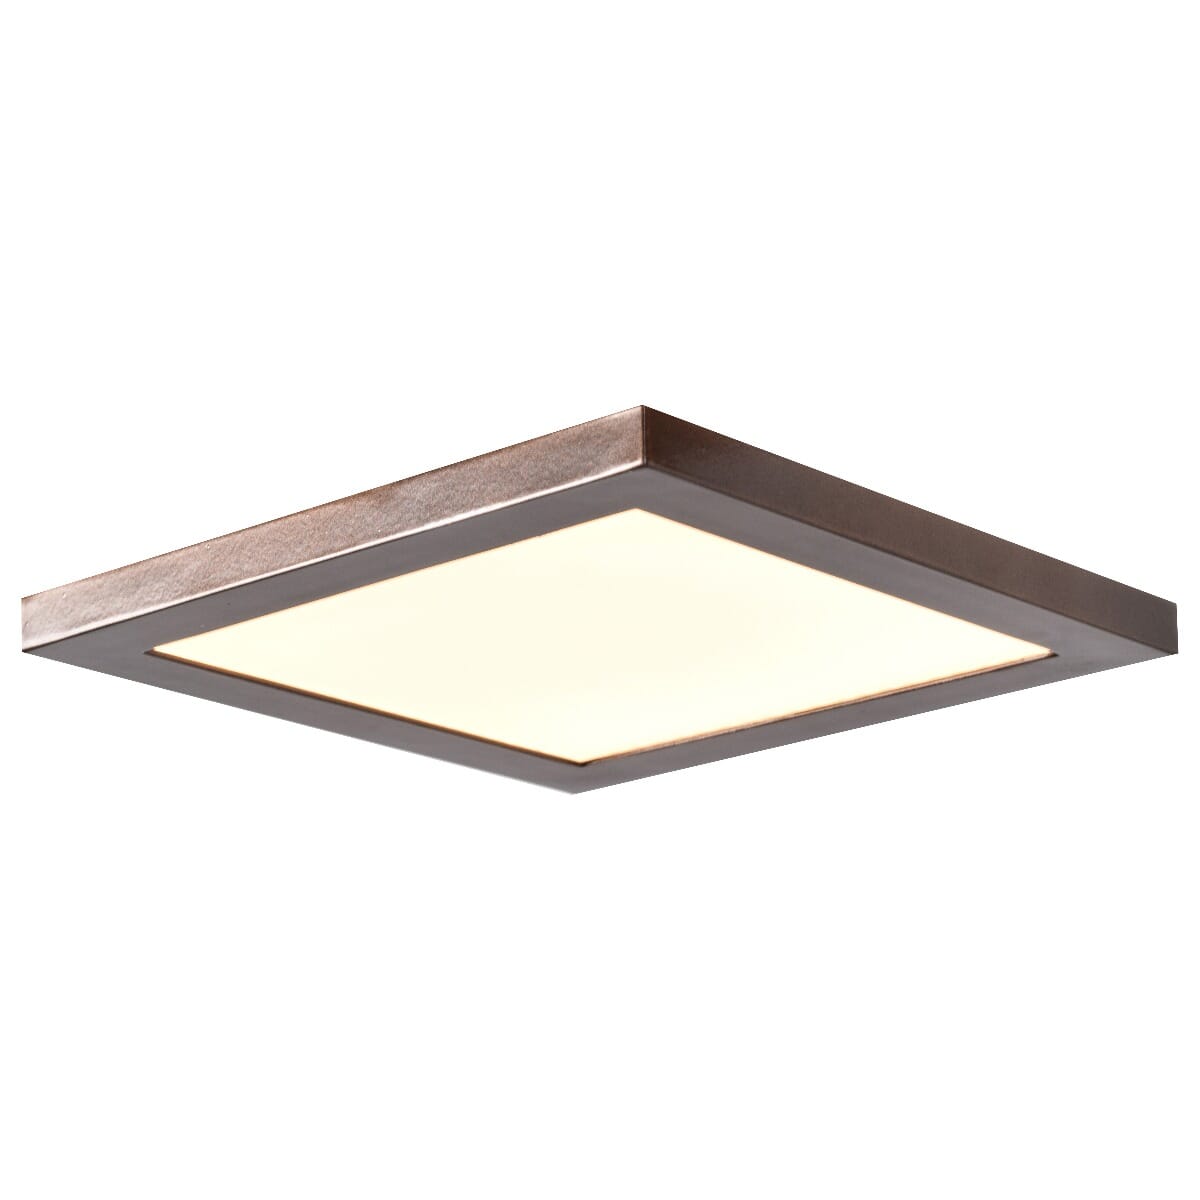 Access Boxer 8" Ceiling Light in Brushed Steel